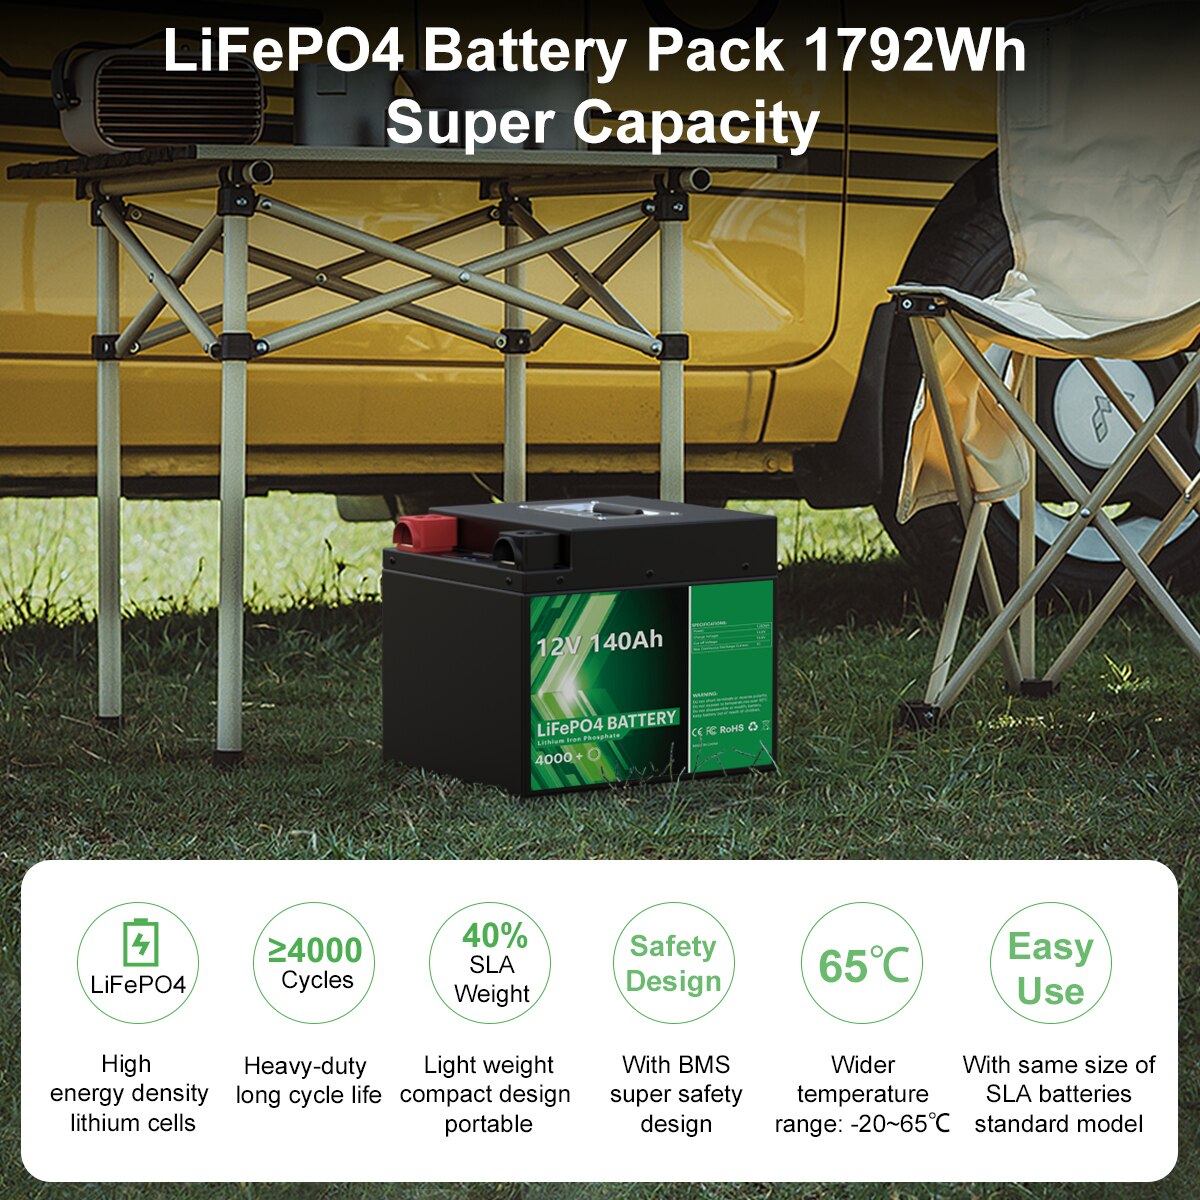 LiFePO4 Battery Pack 1792Wh Super Capa